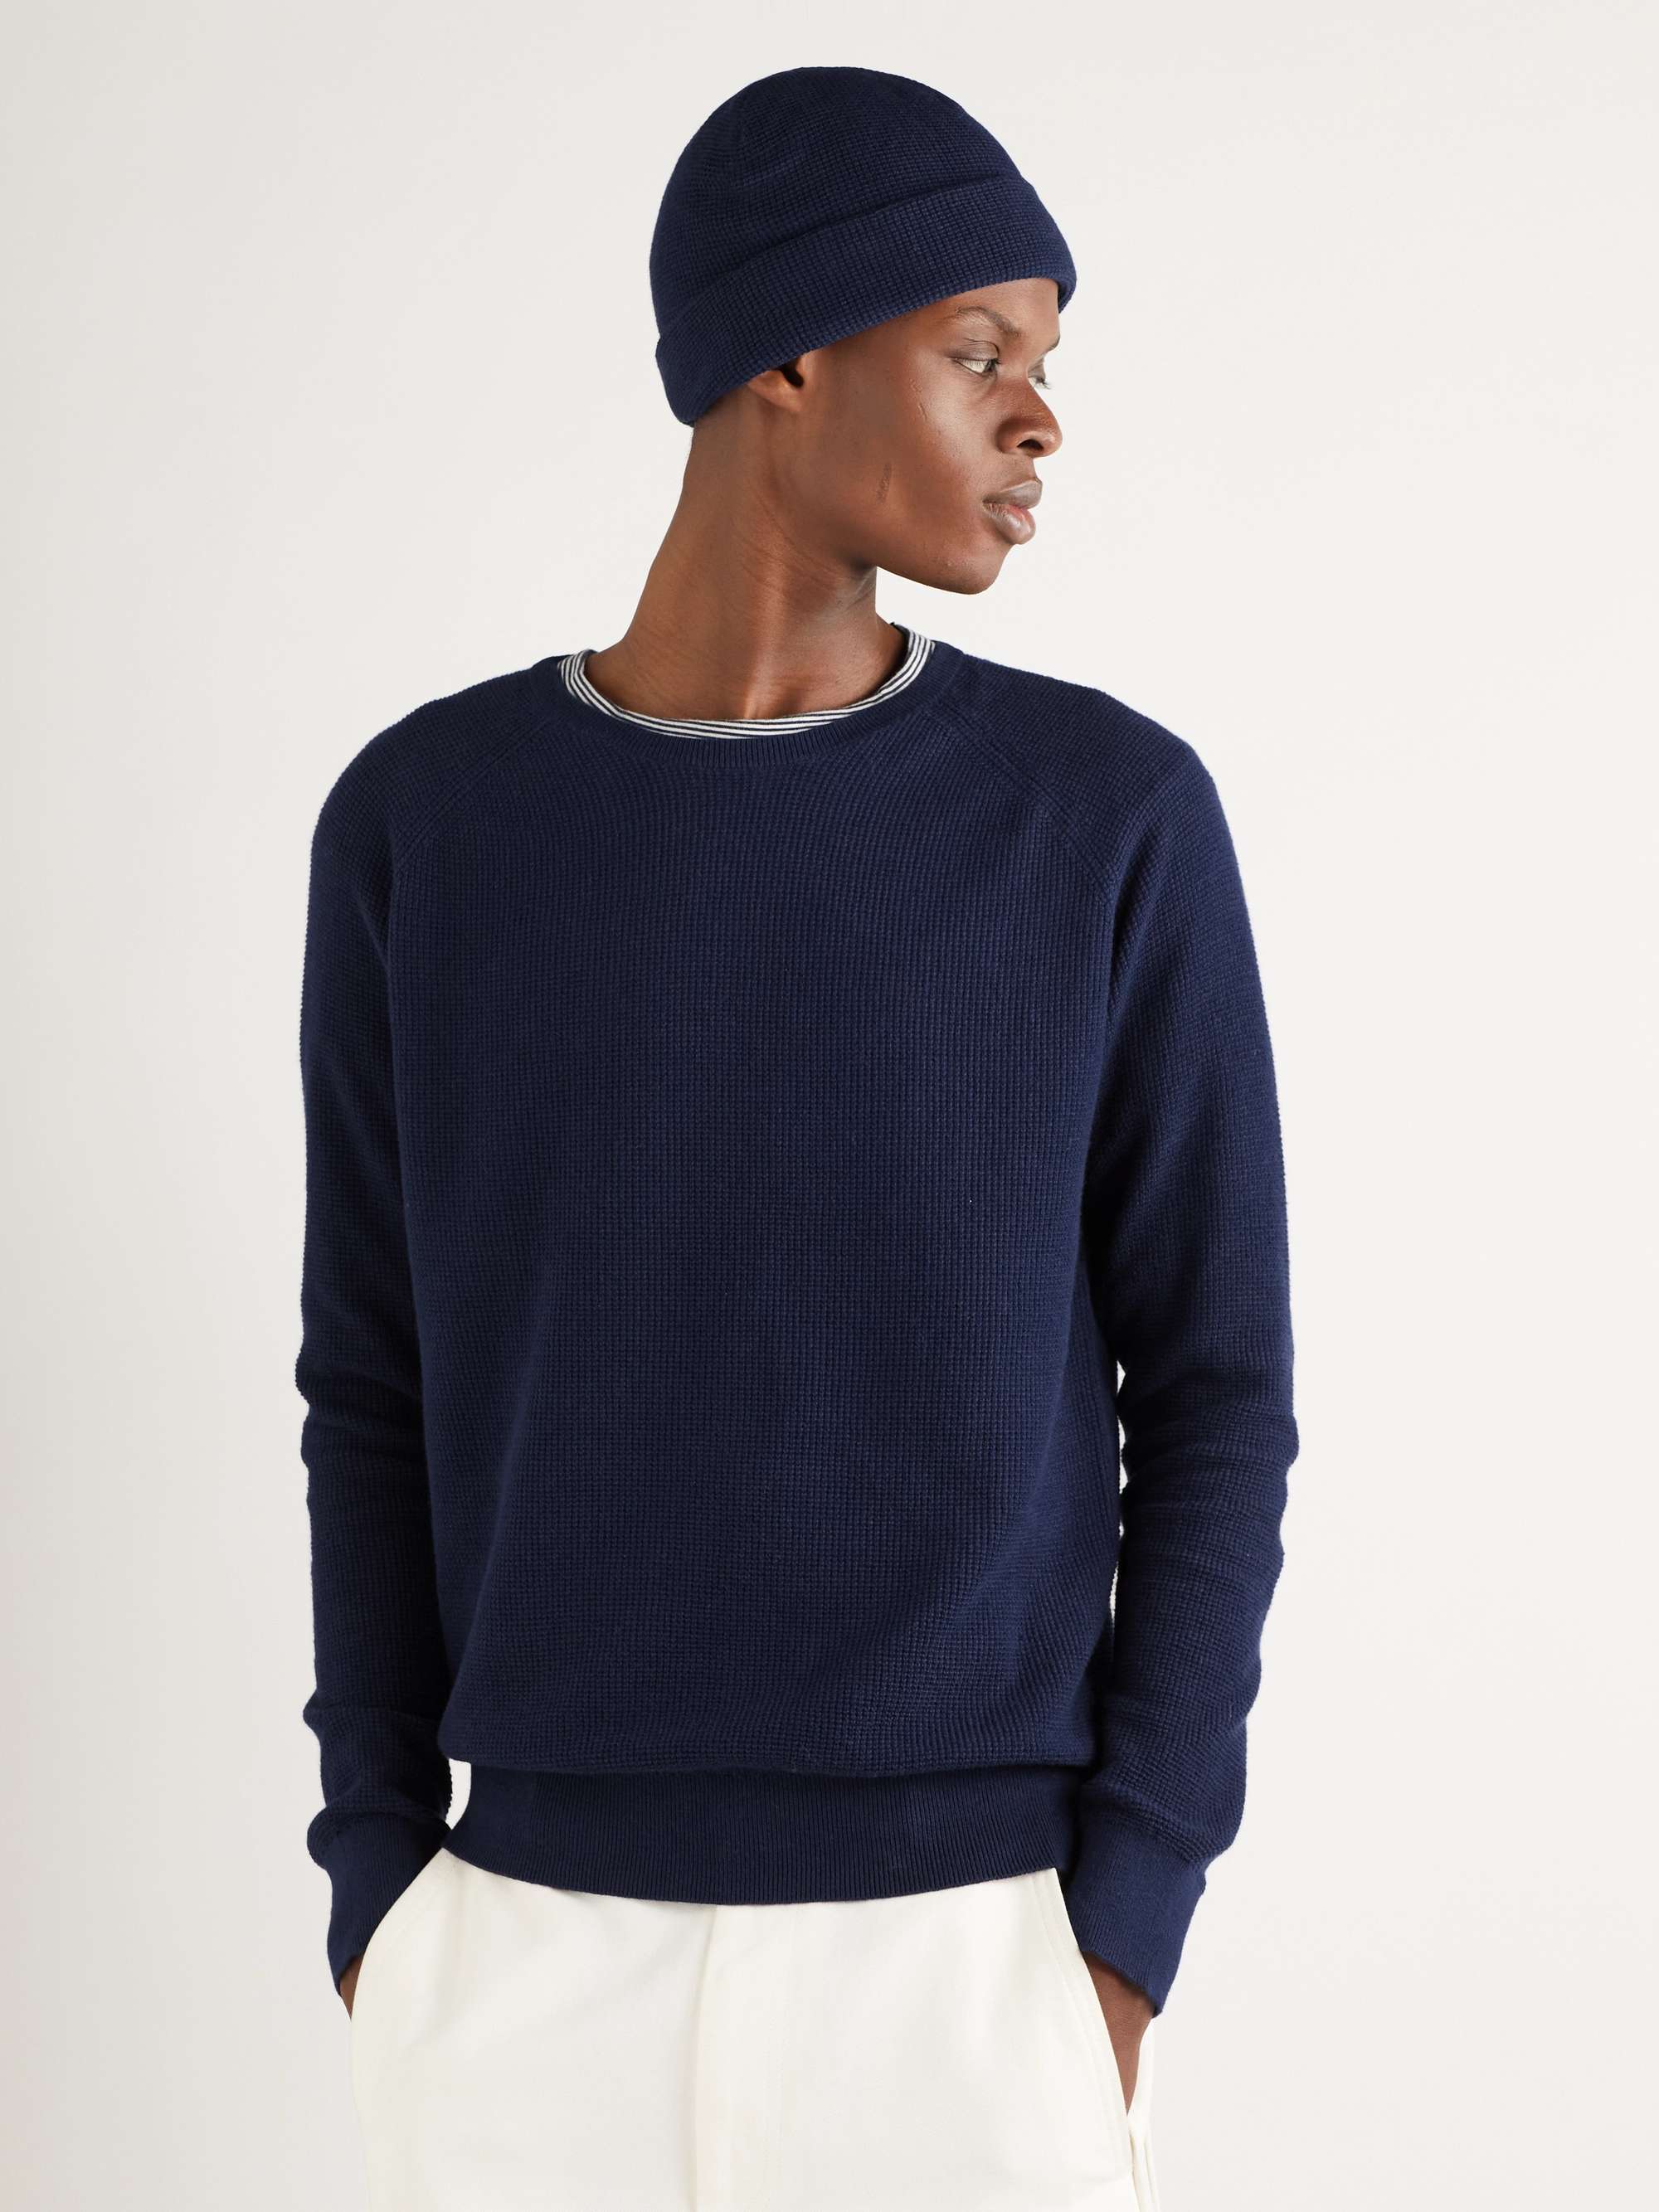 ONIA Waffle-Knit Cotton and Cashmere-Blend Sweater and Beanie Set | MR  PORTER